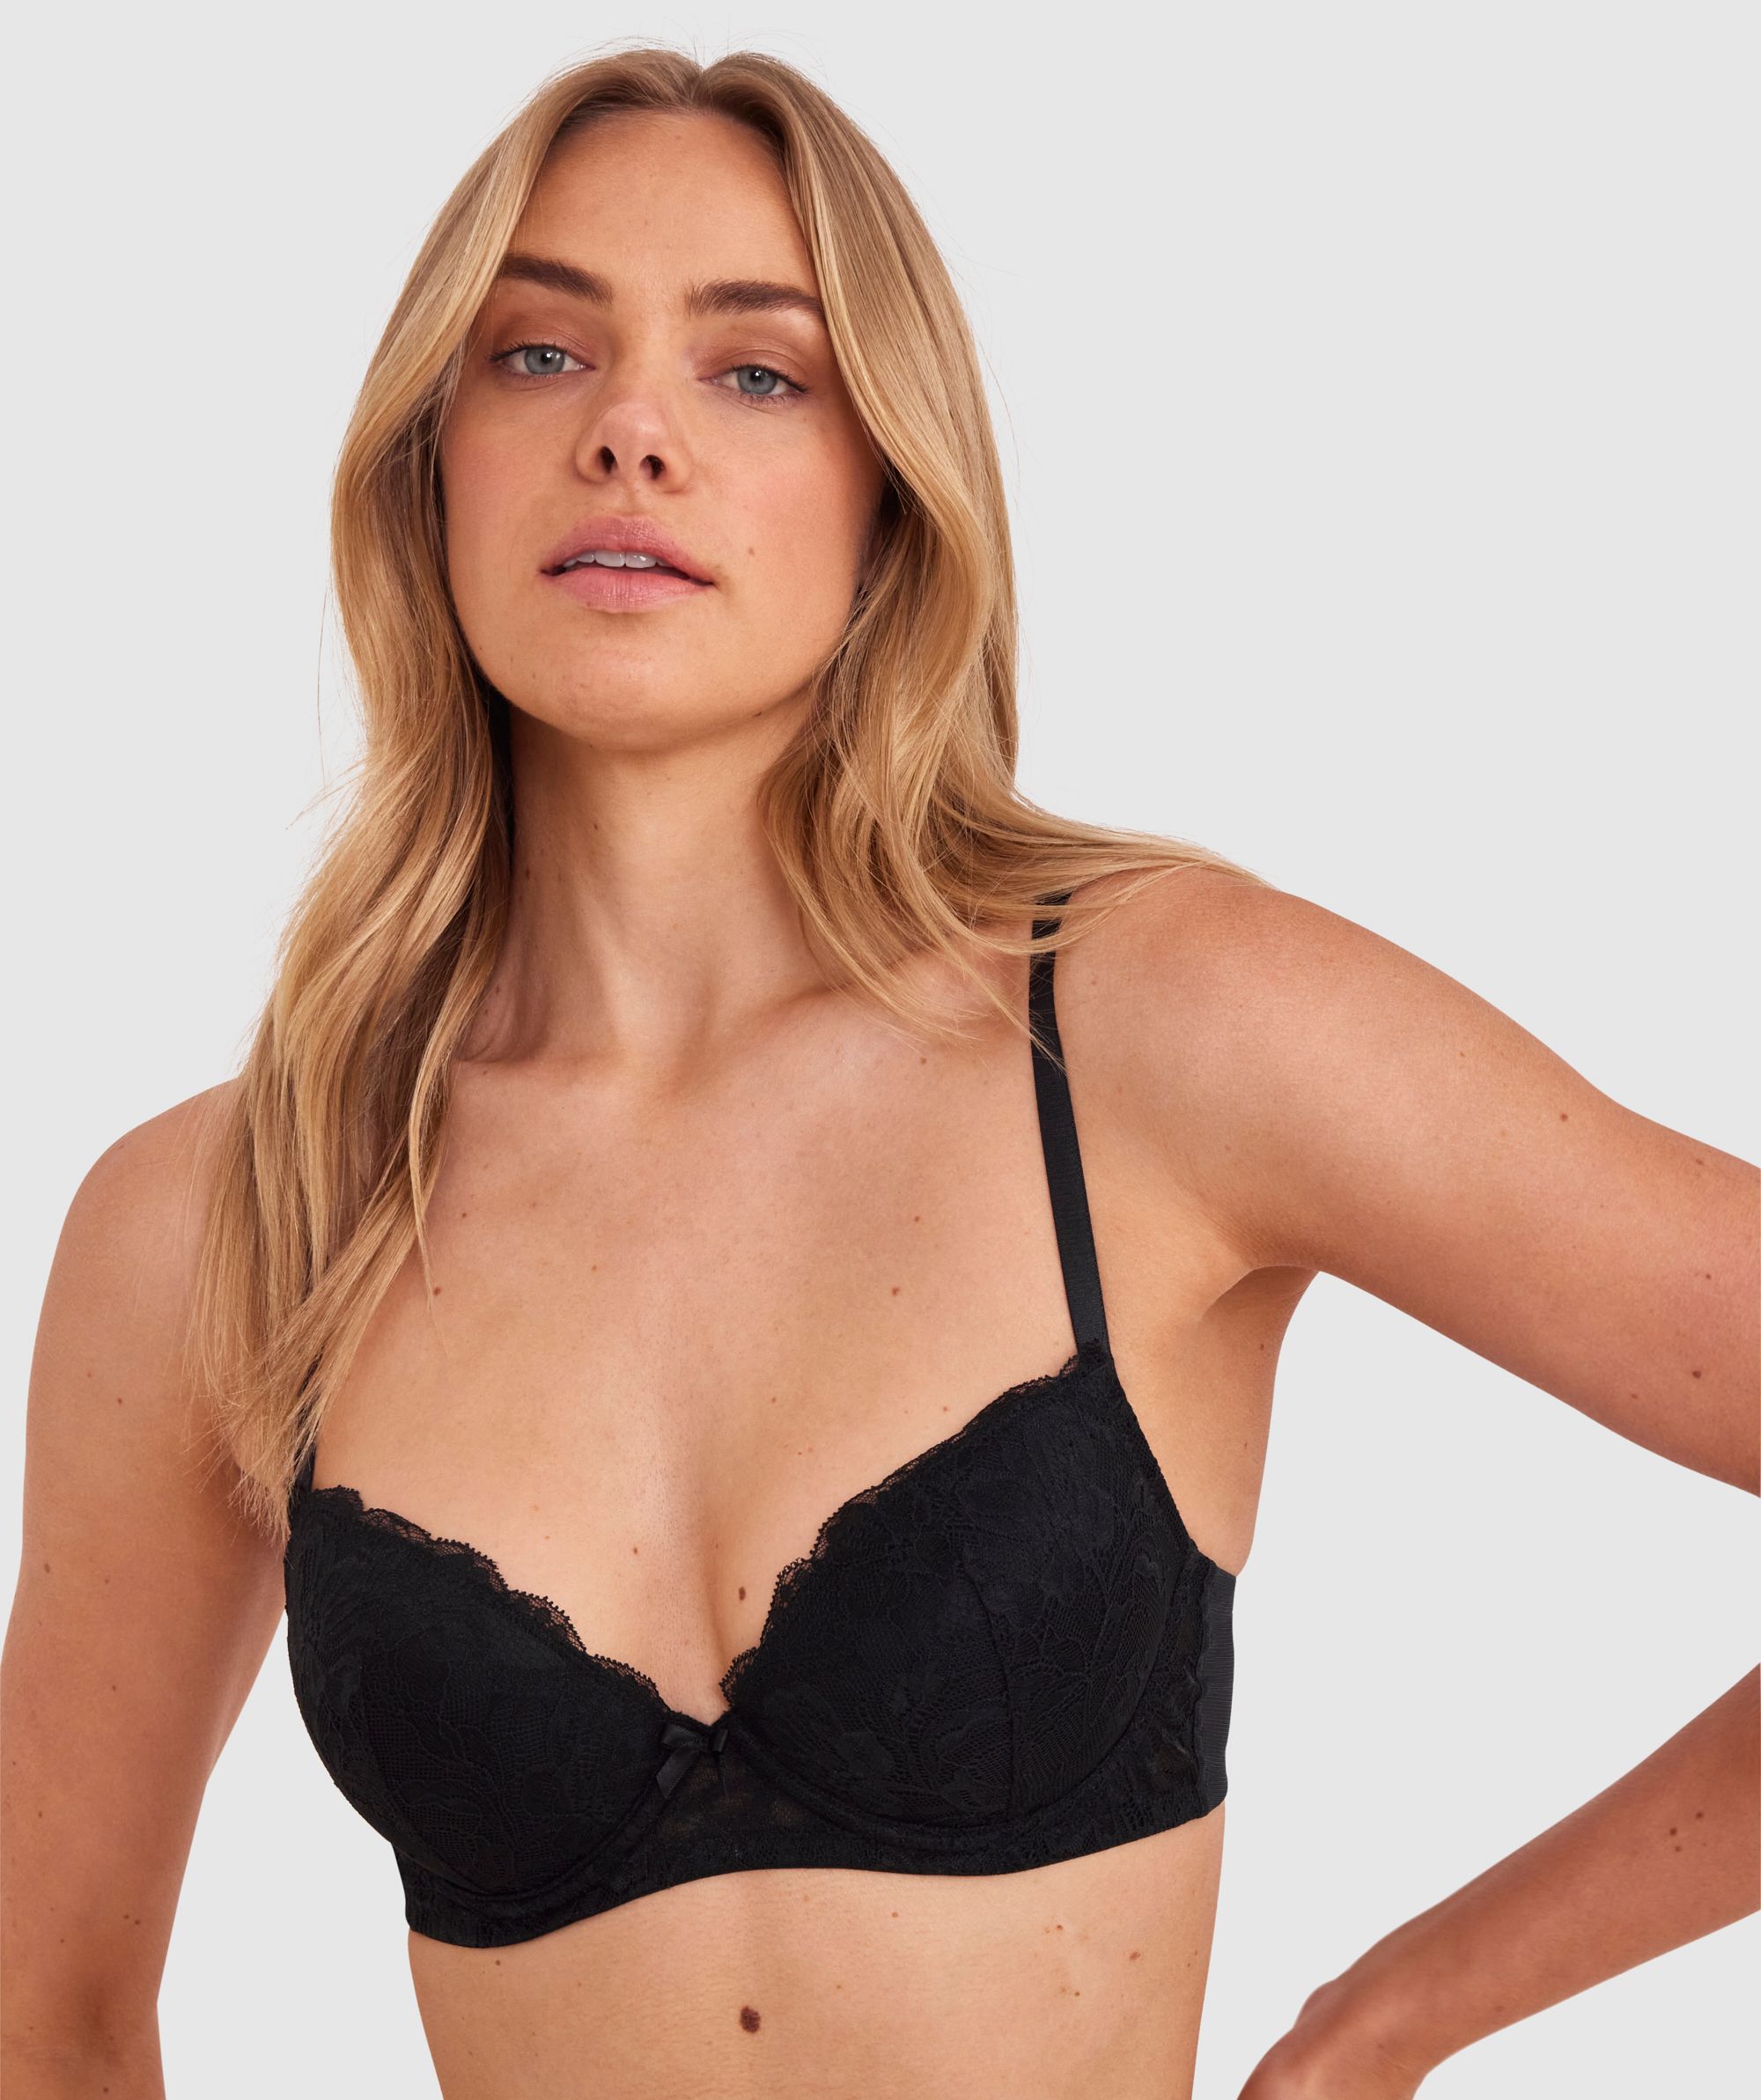 Bras N Things: $20 OFF selected bras*, New styles bound to turn heads